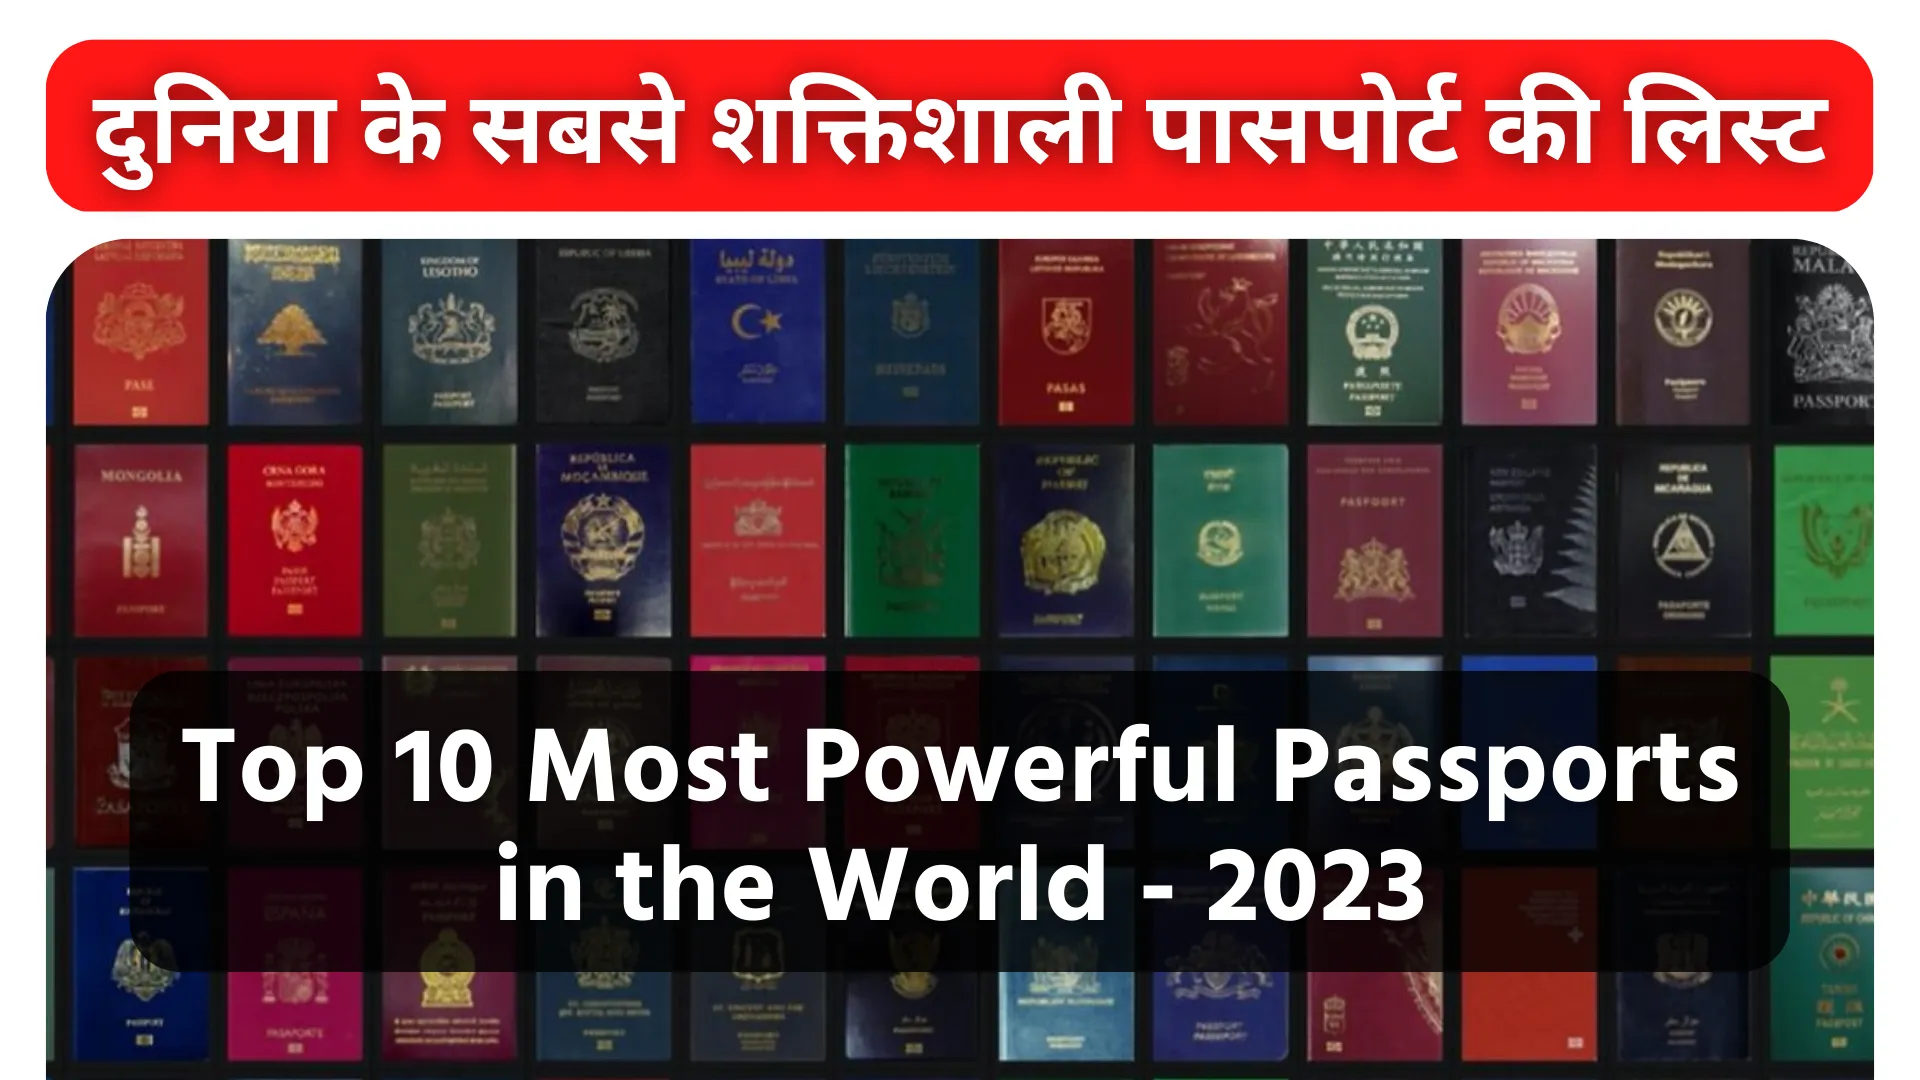 Top 10 Most Powerful Passports in the World - 2023